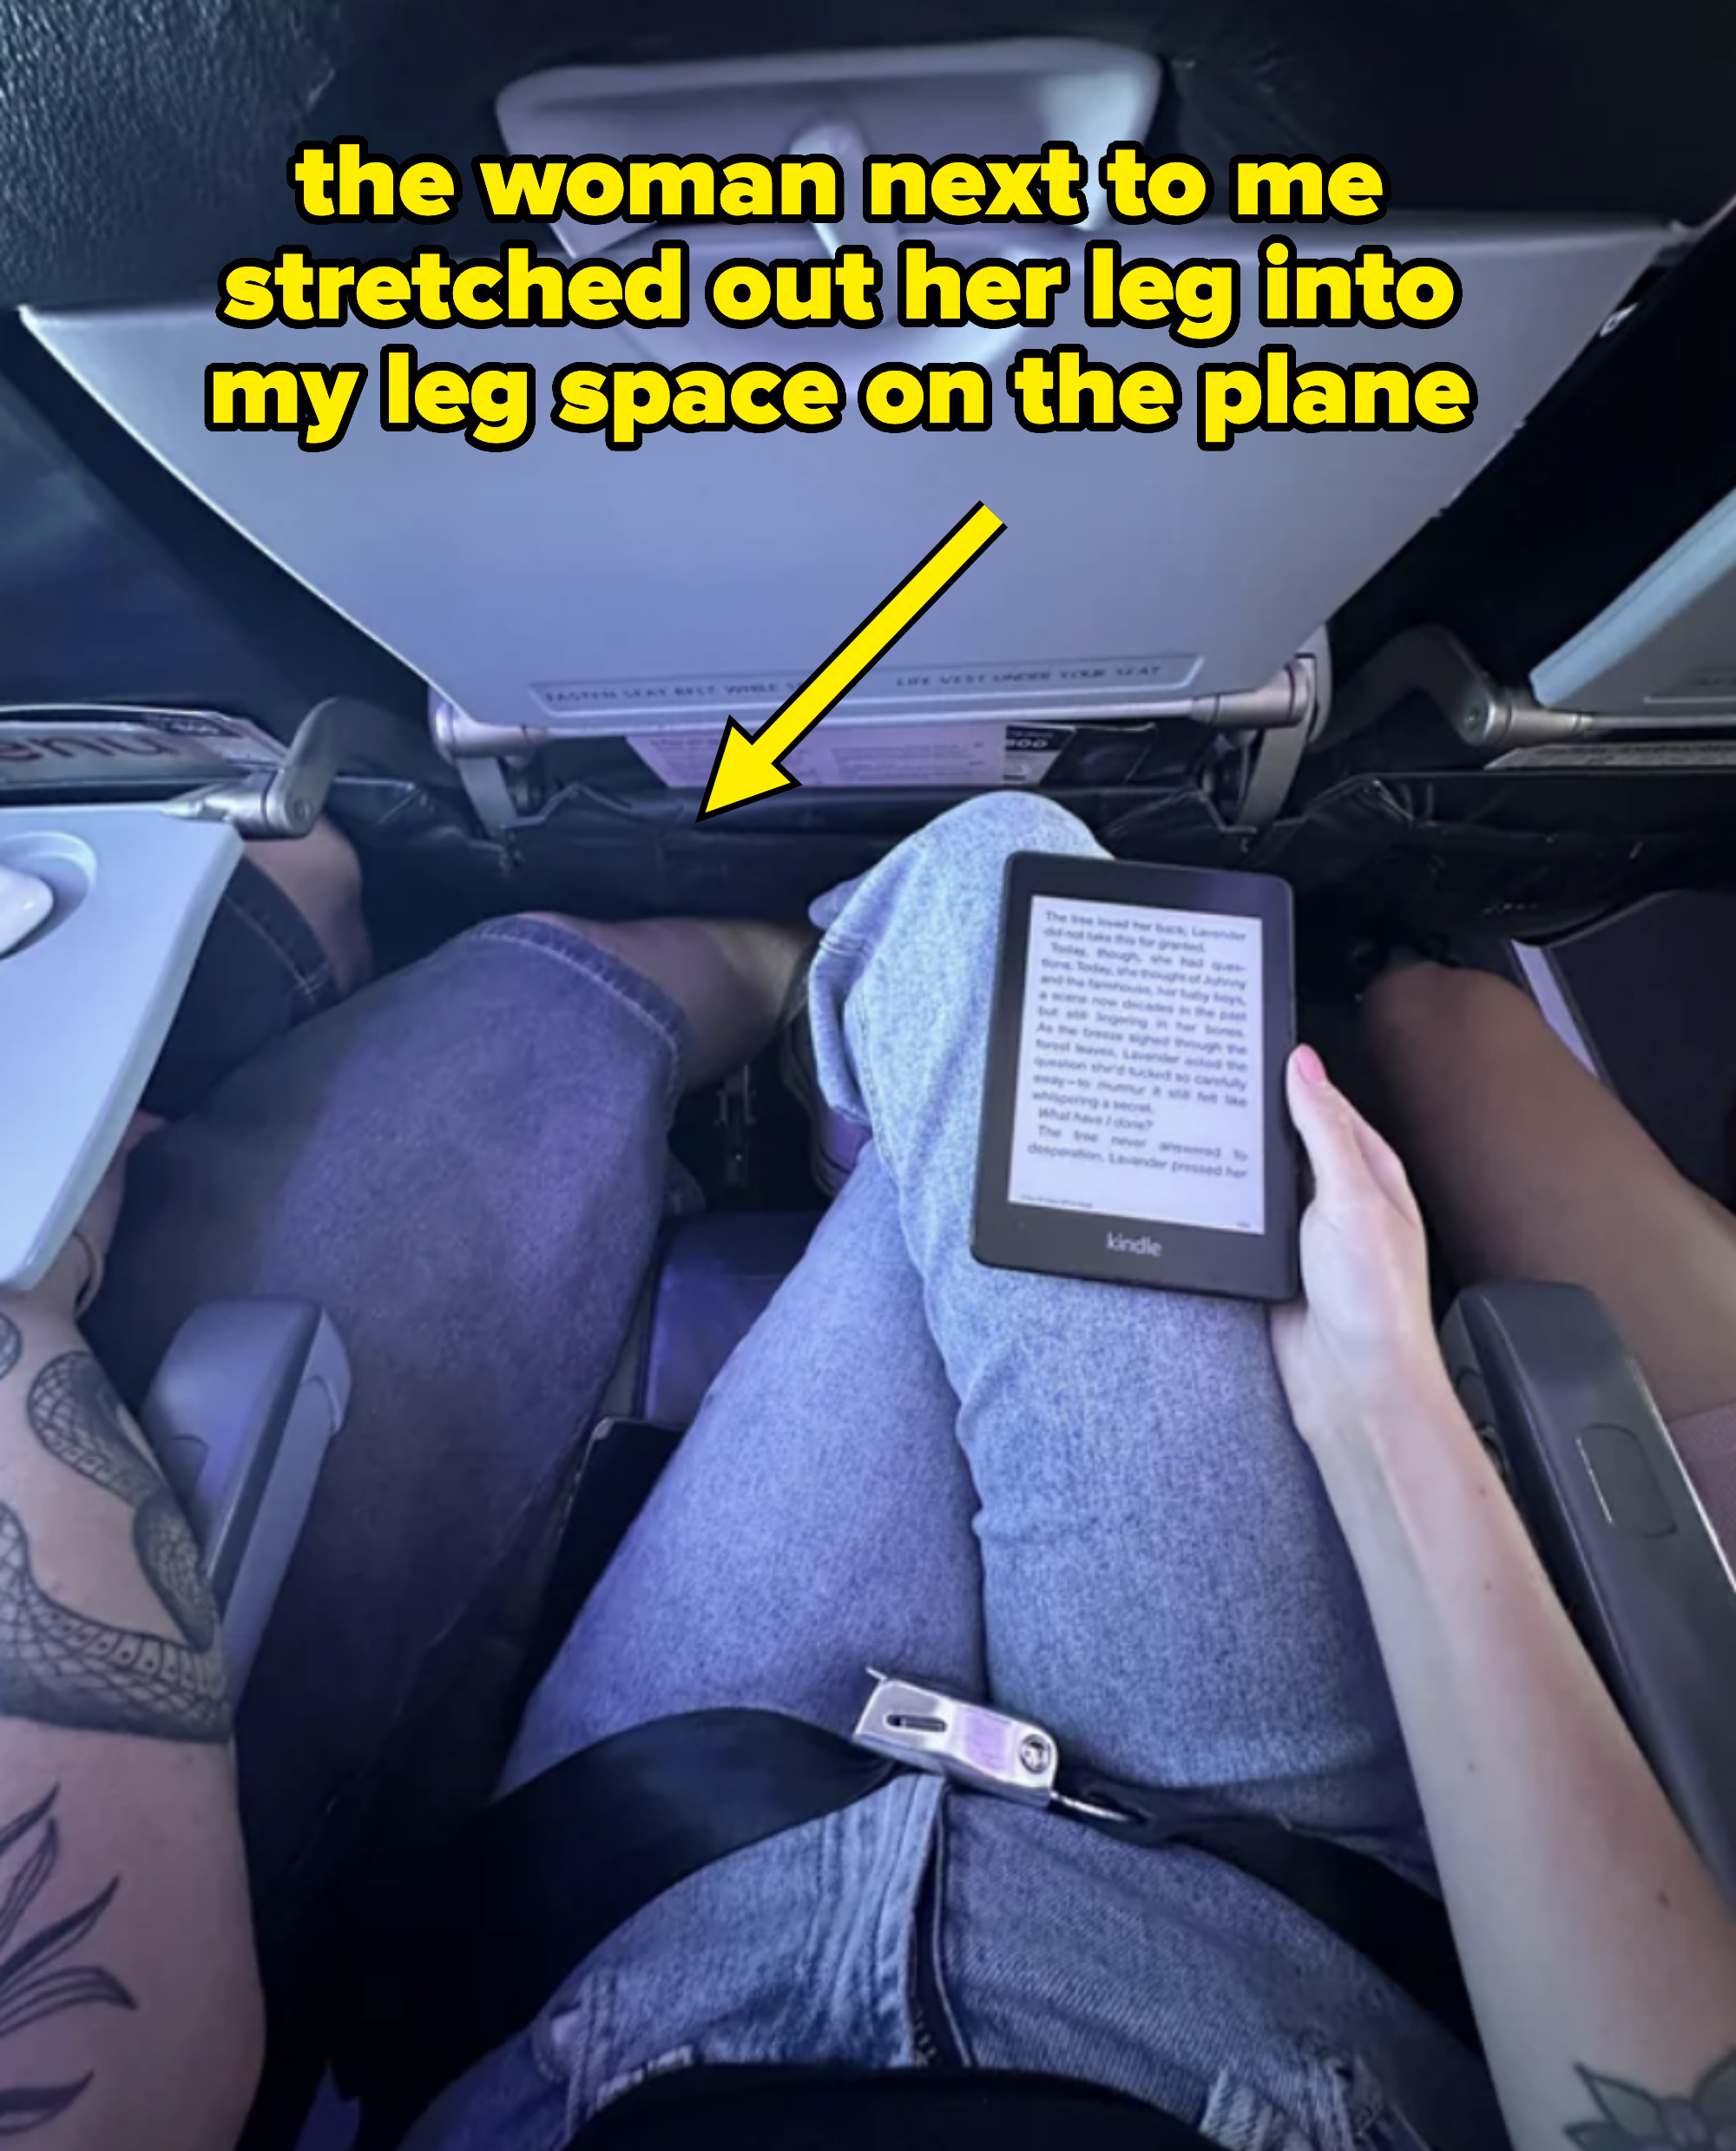 a person&#x27;s leg infringing on someone else&#x27;s leg room on a plane